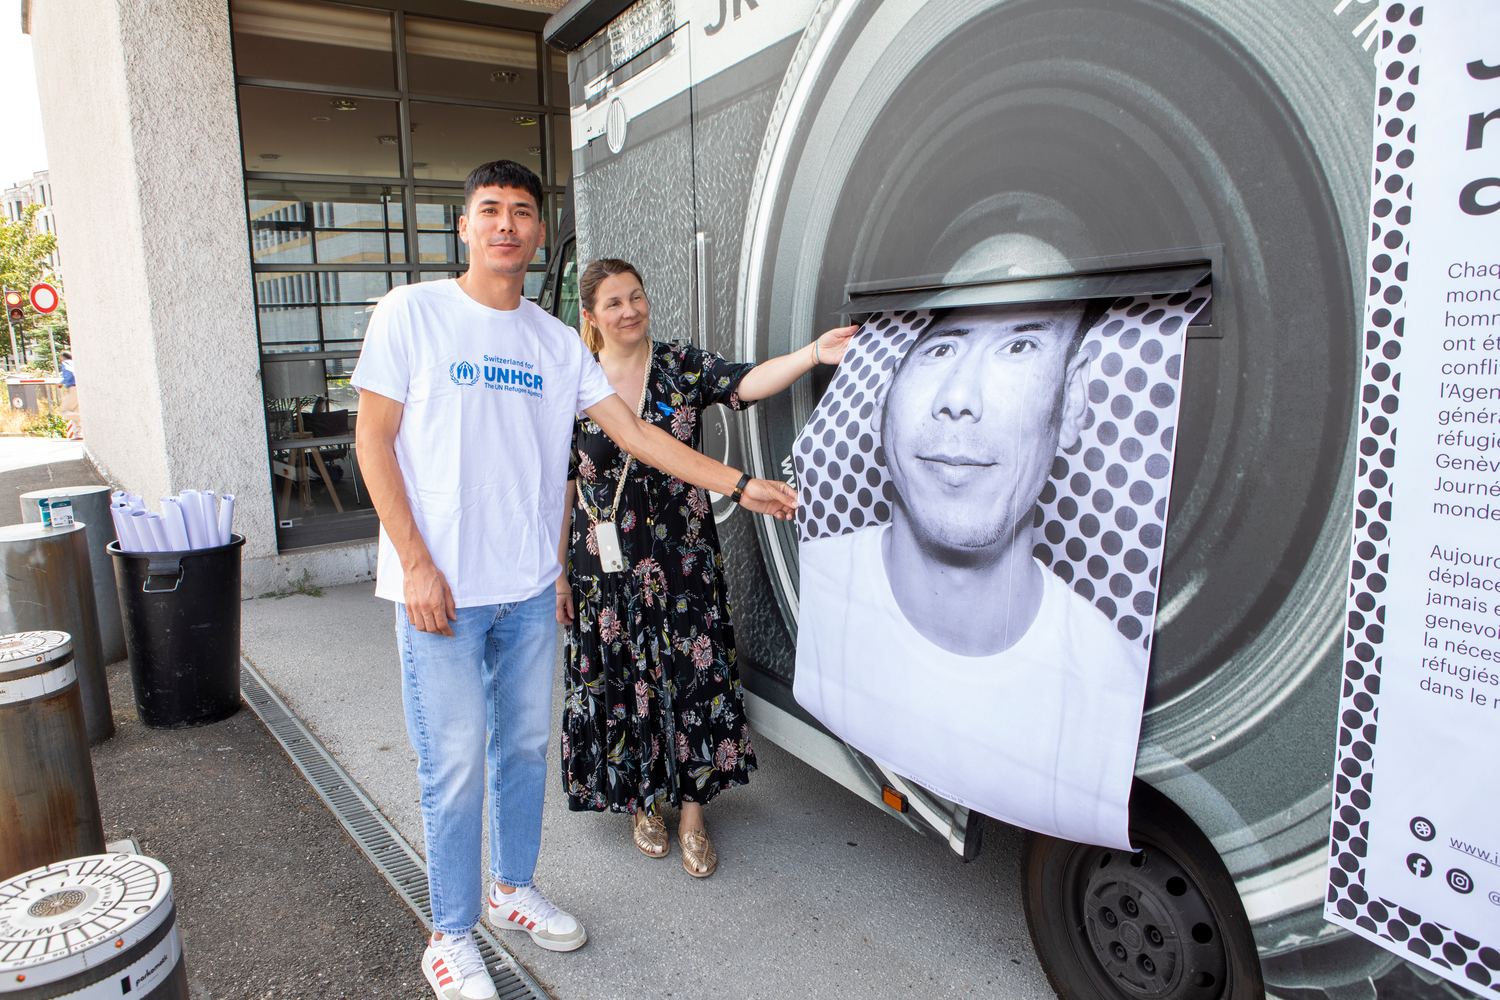 A man holds a portrait photo of himself next to a mobile photography truck.